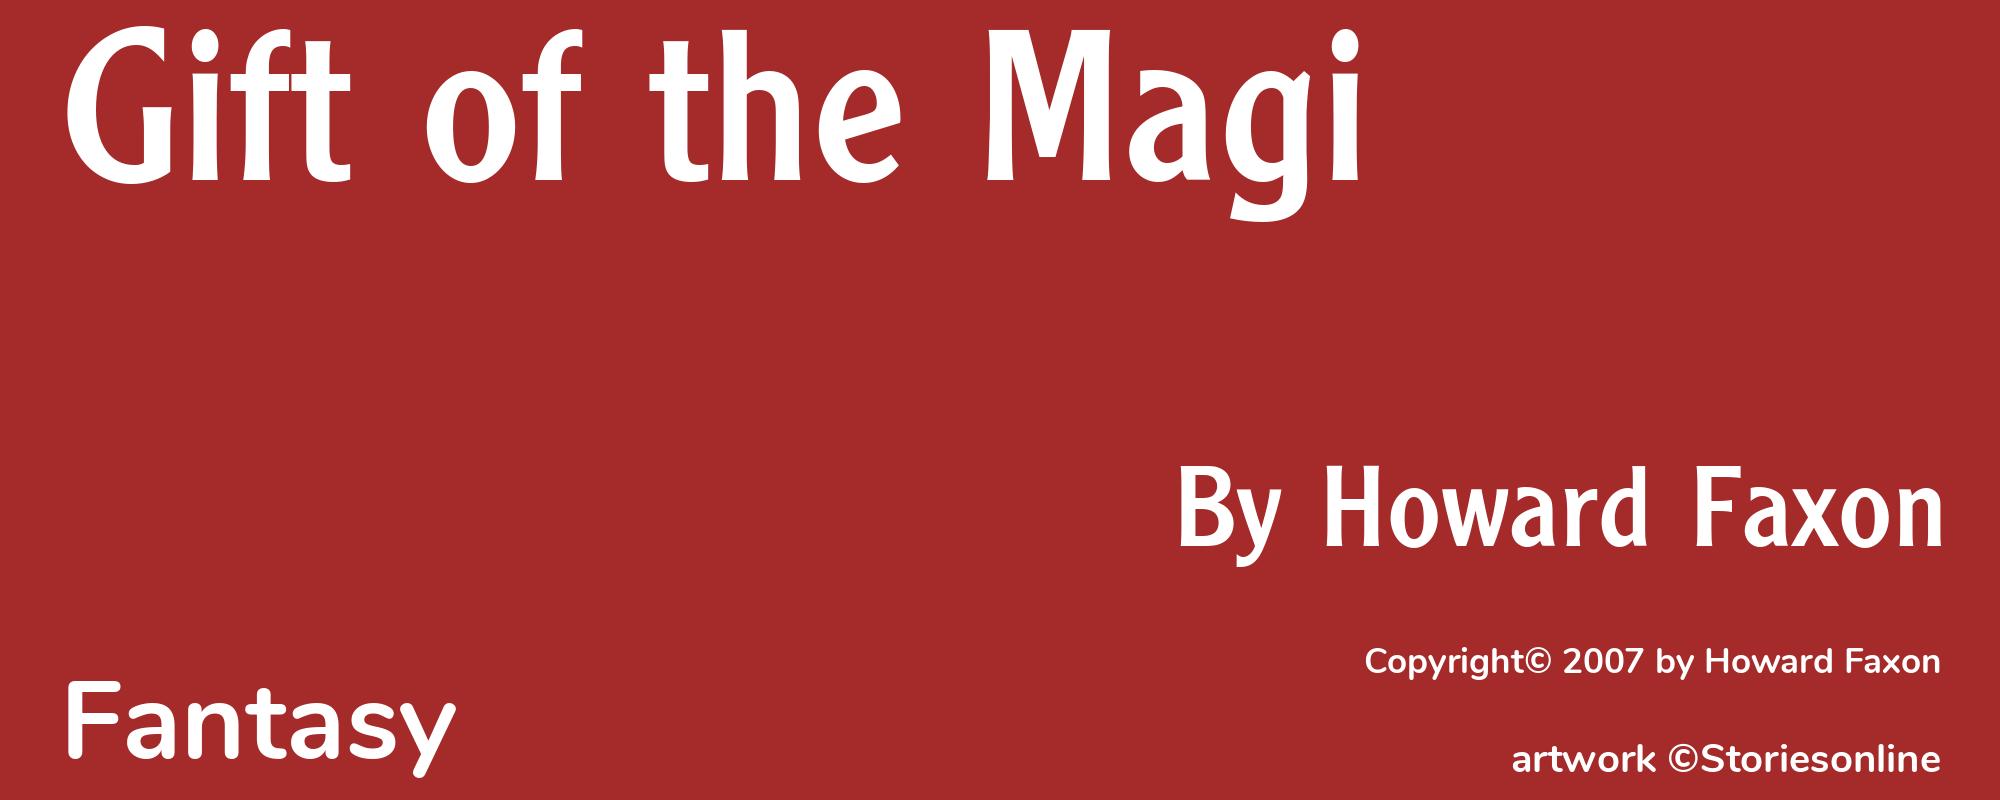 Gift of the Magi - Cover